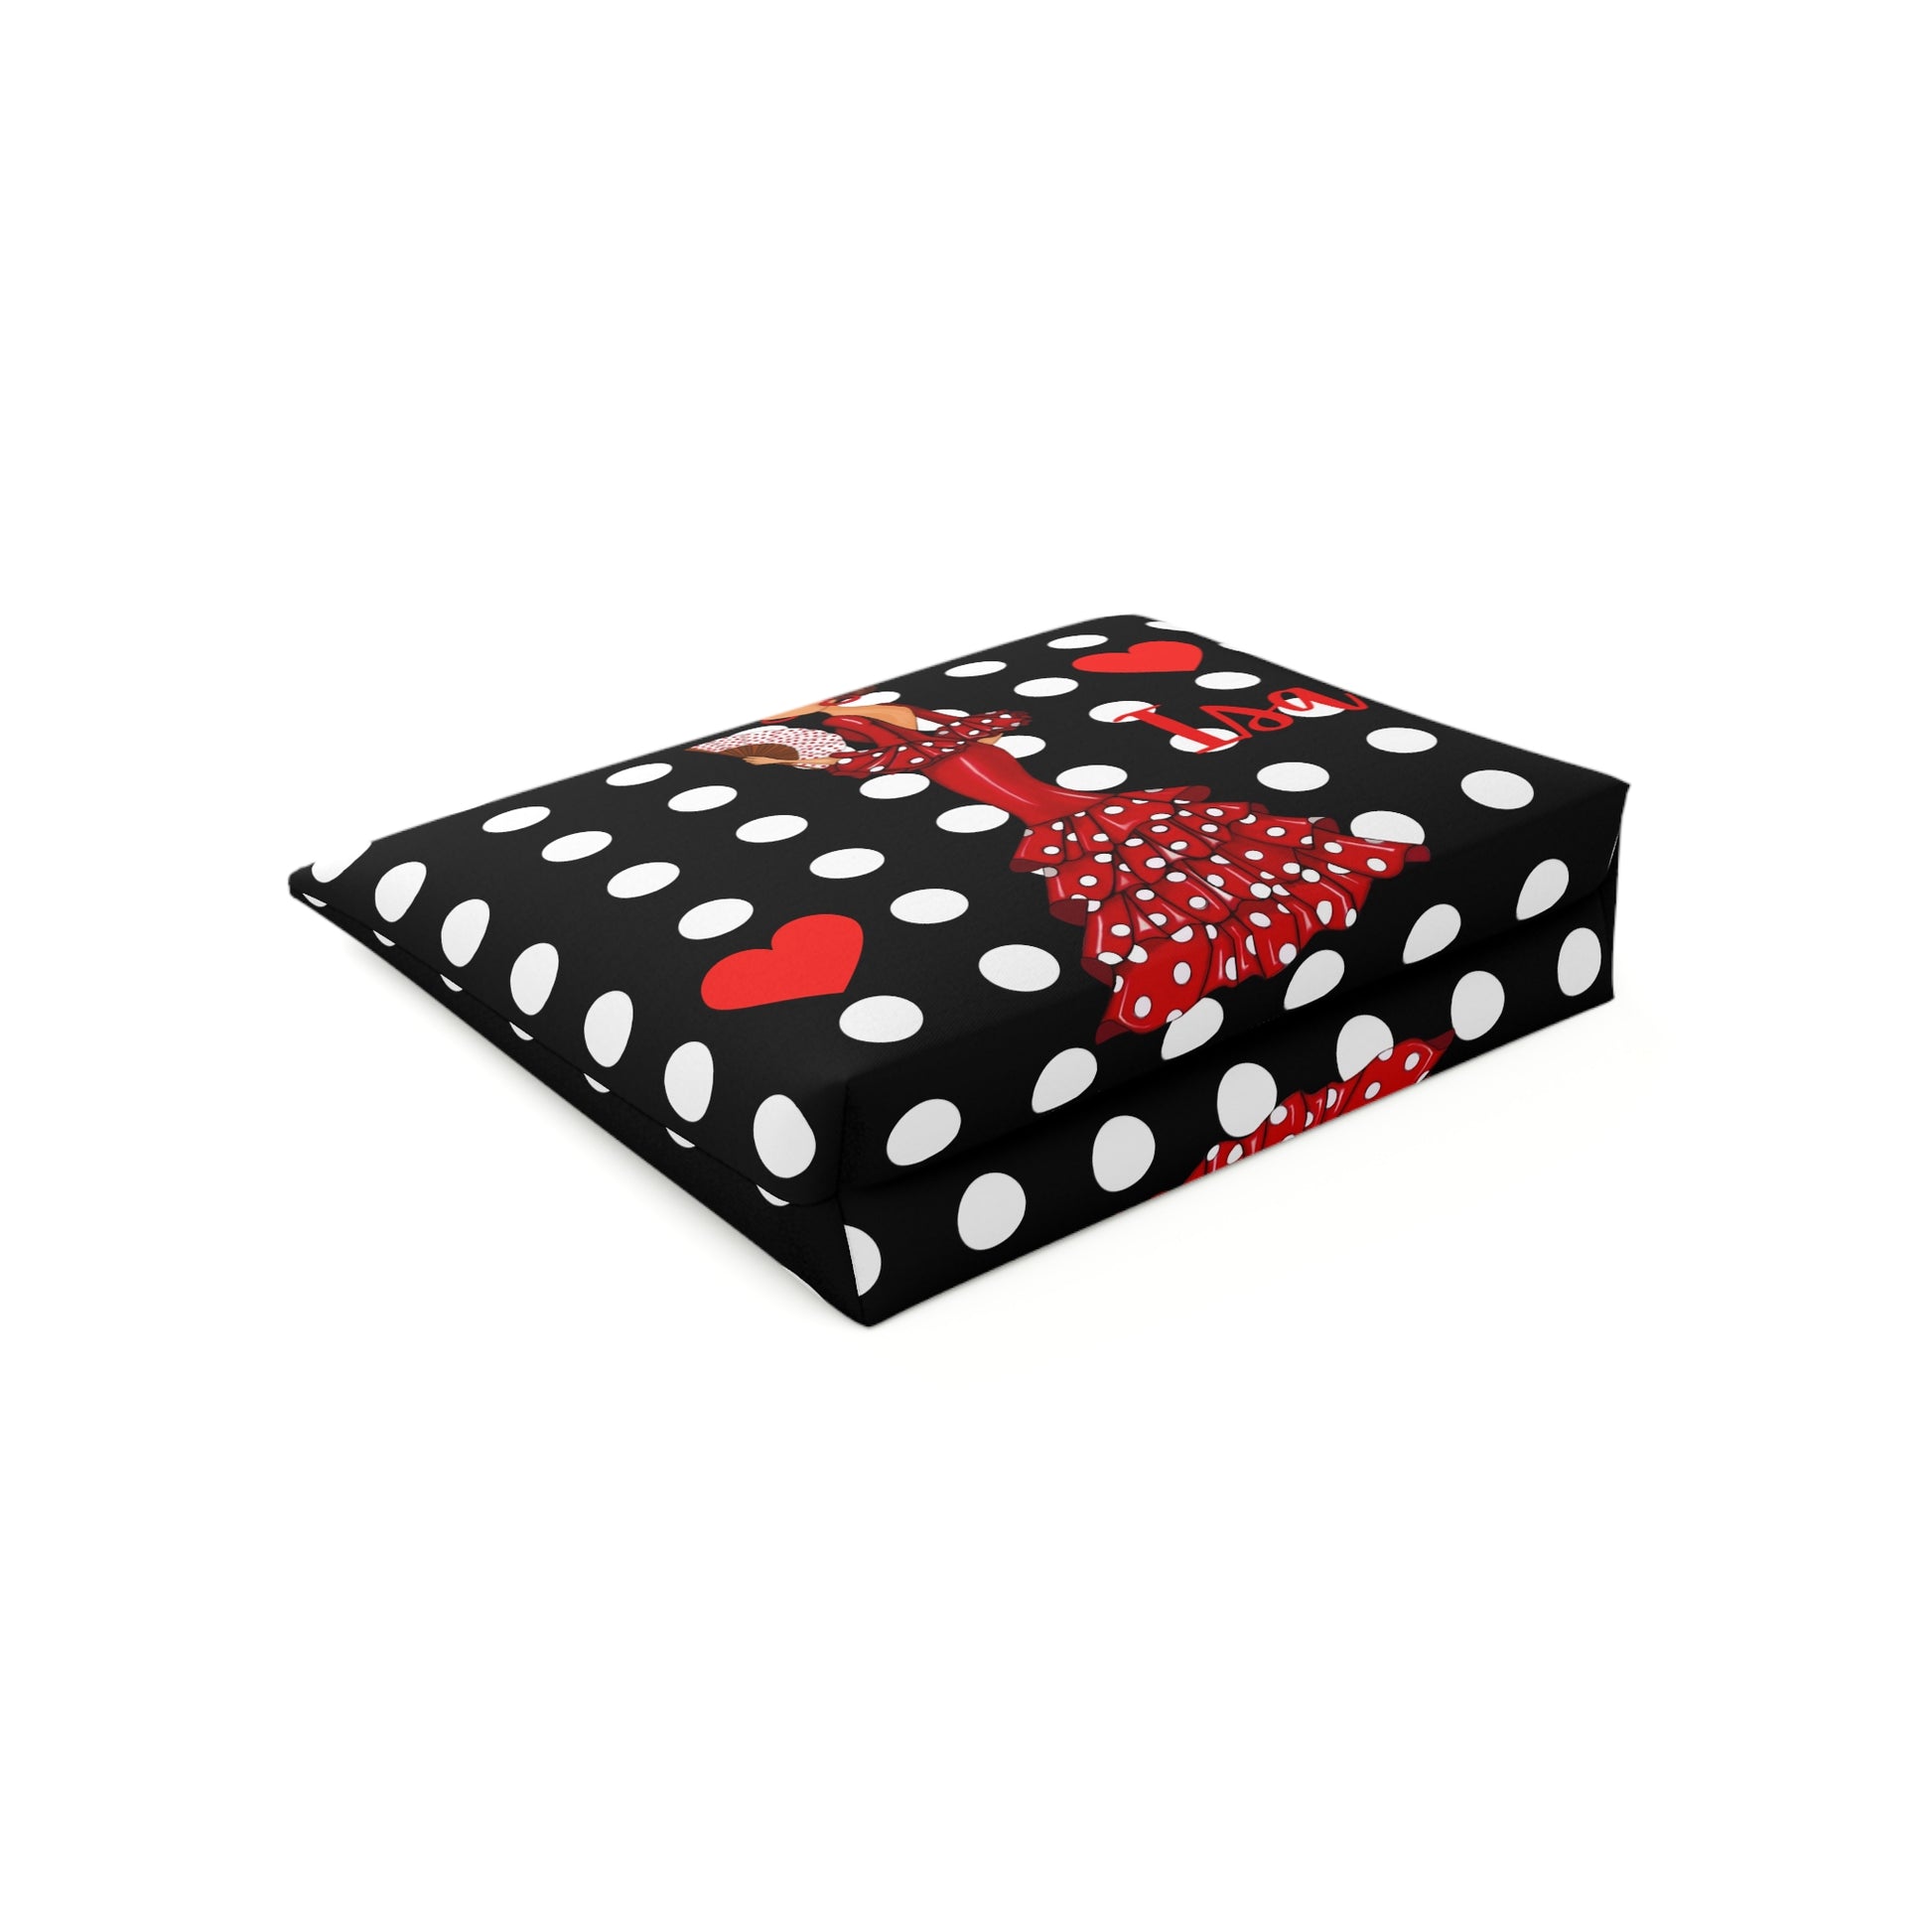 a black and white polka dot box with a red bow